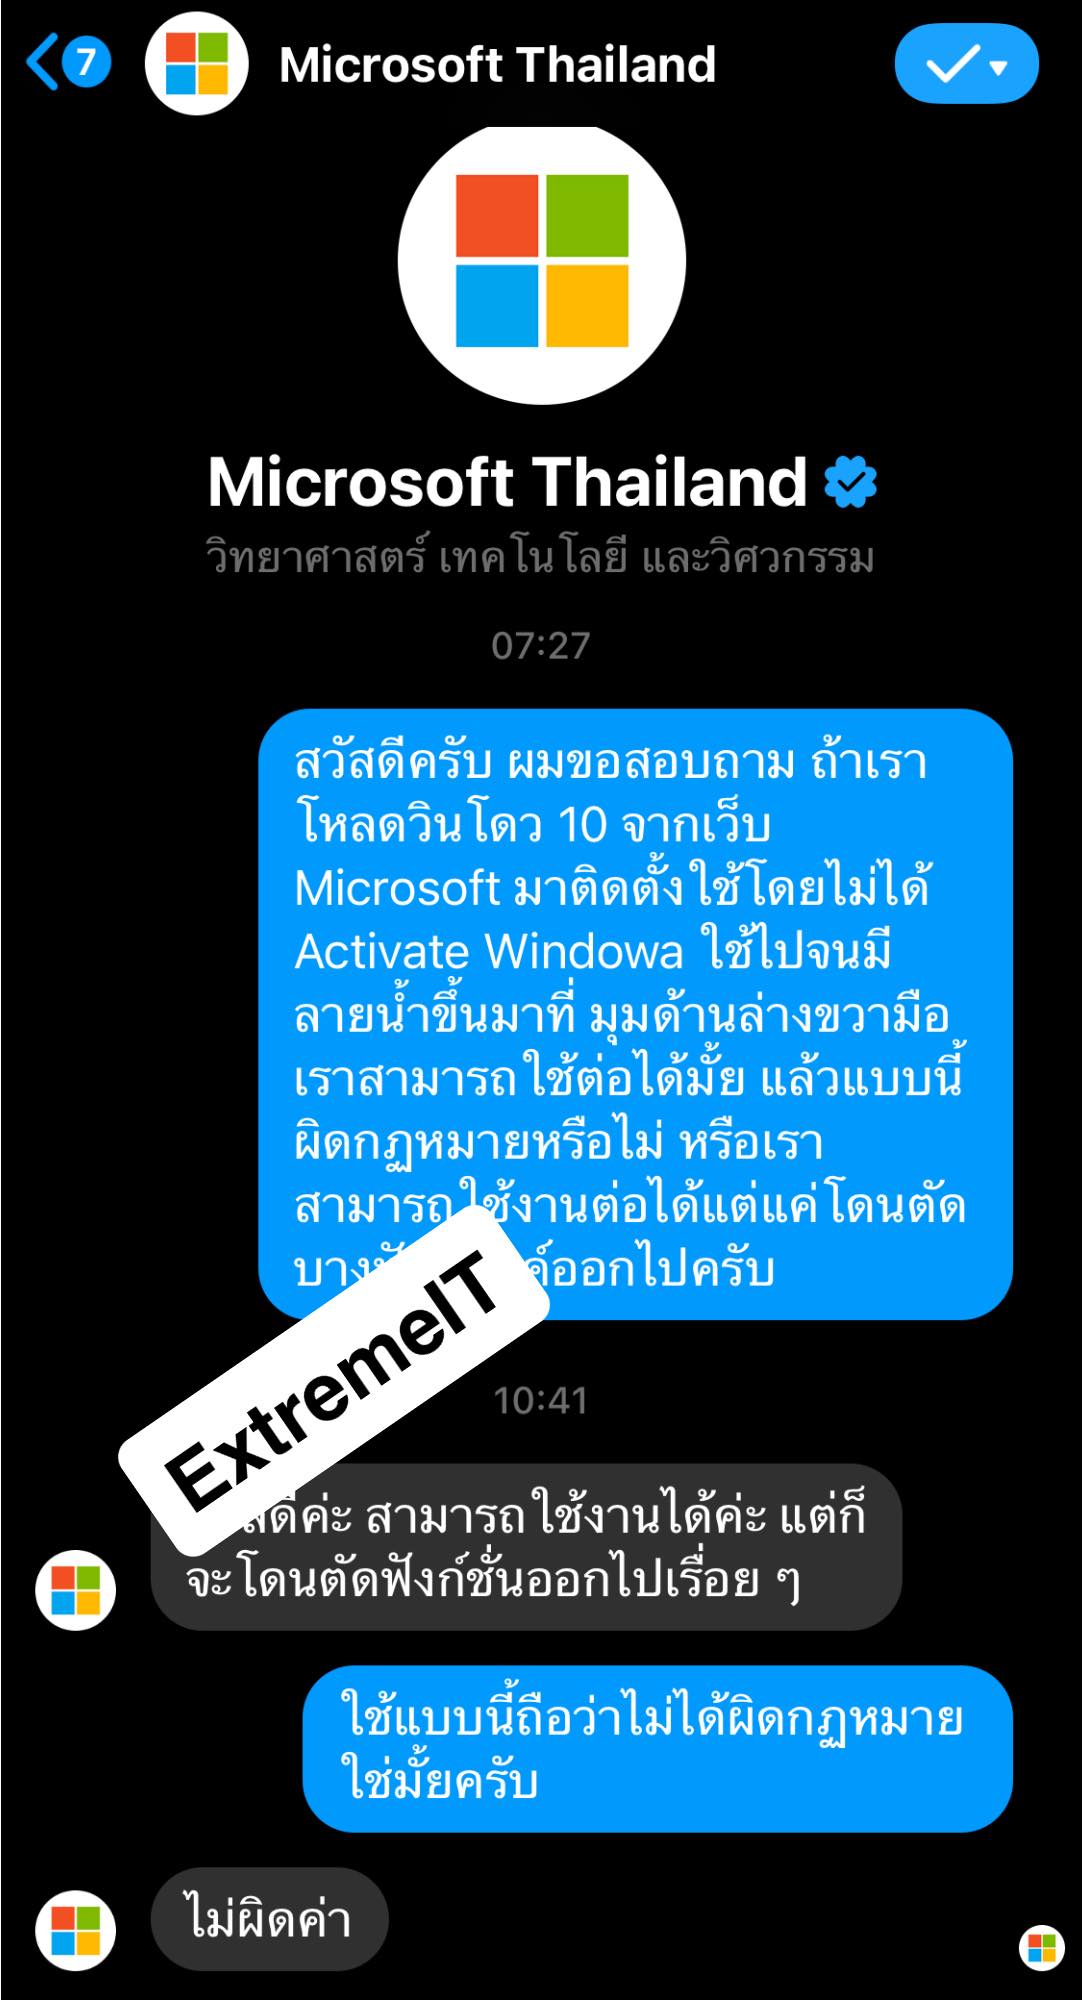 Big good new! using windows10 without activated in Thailand Legel now! 65a32046-f551-4f48-9476-3fd3e1bada62?upload=true.jpg